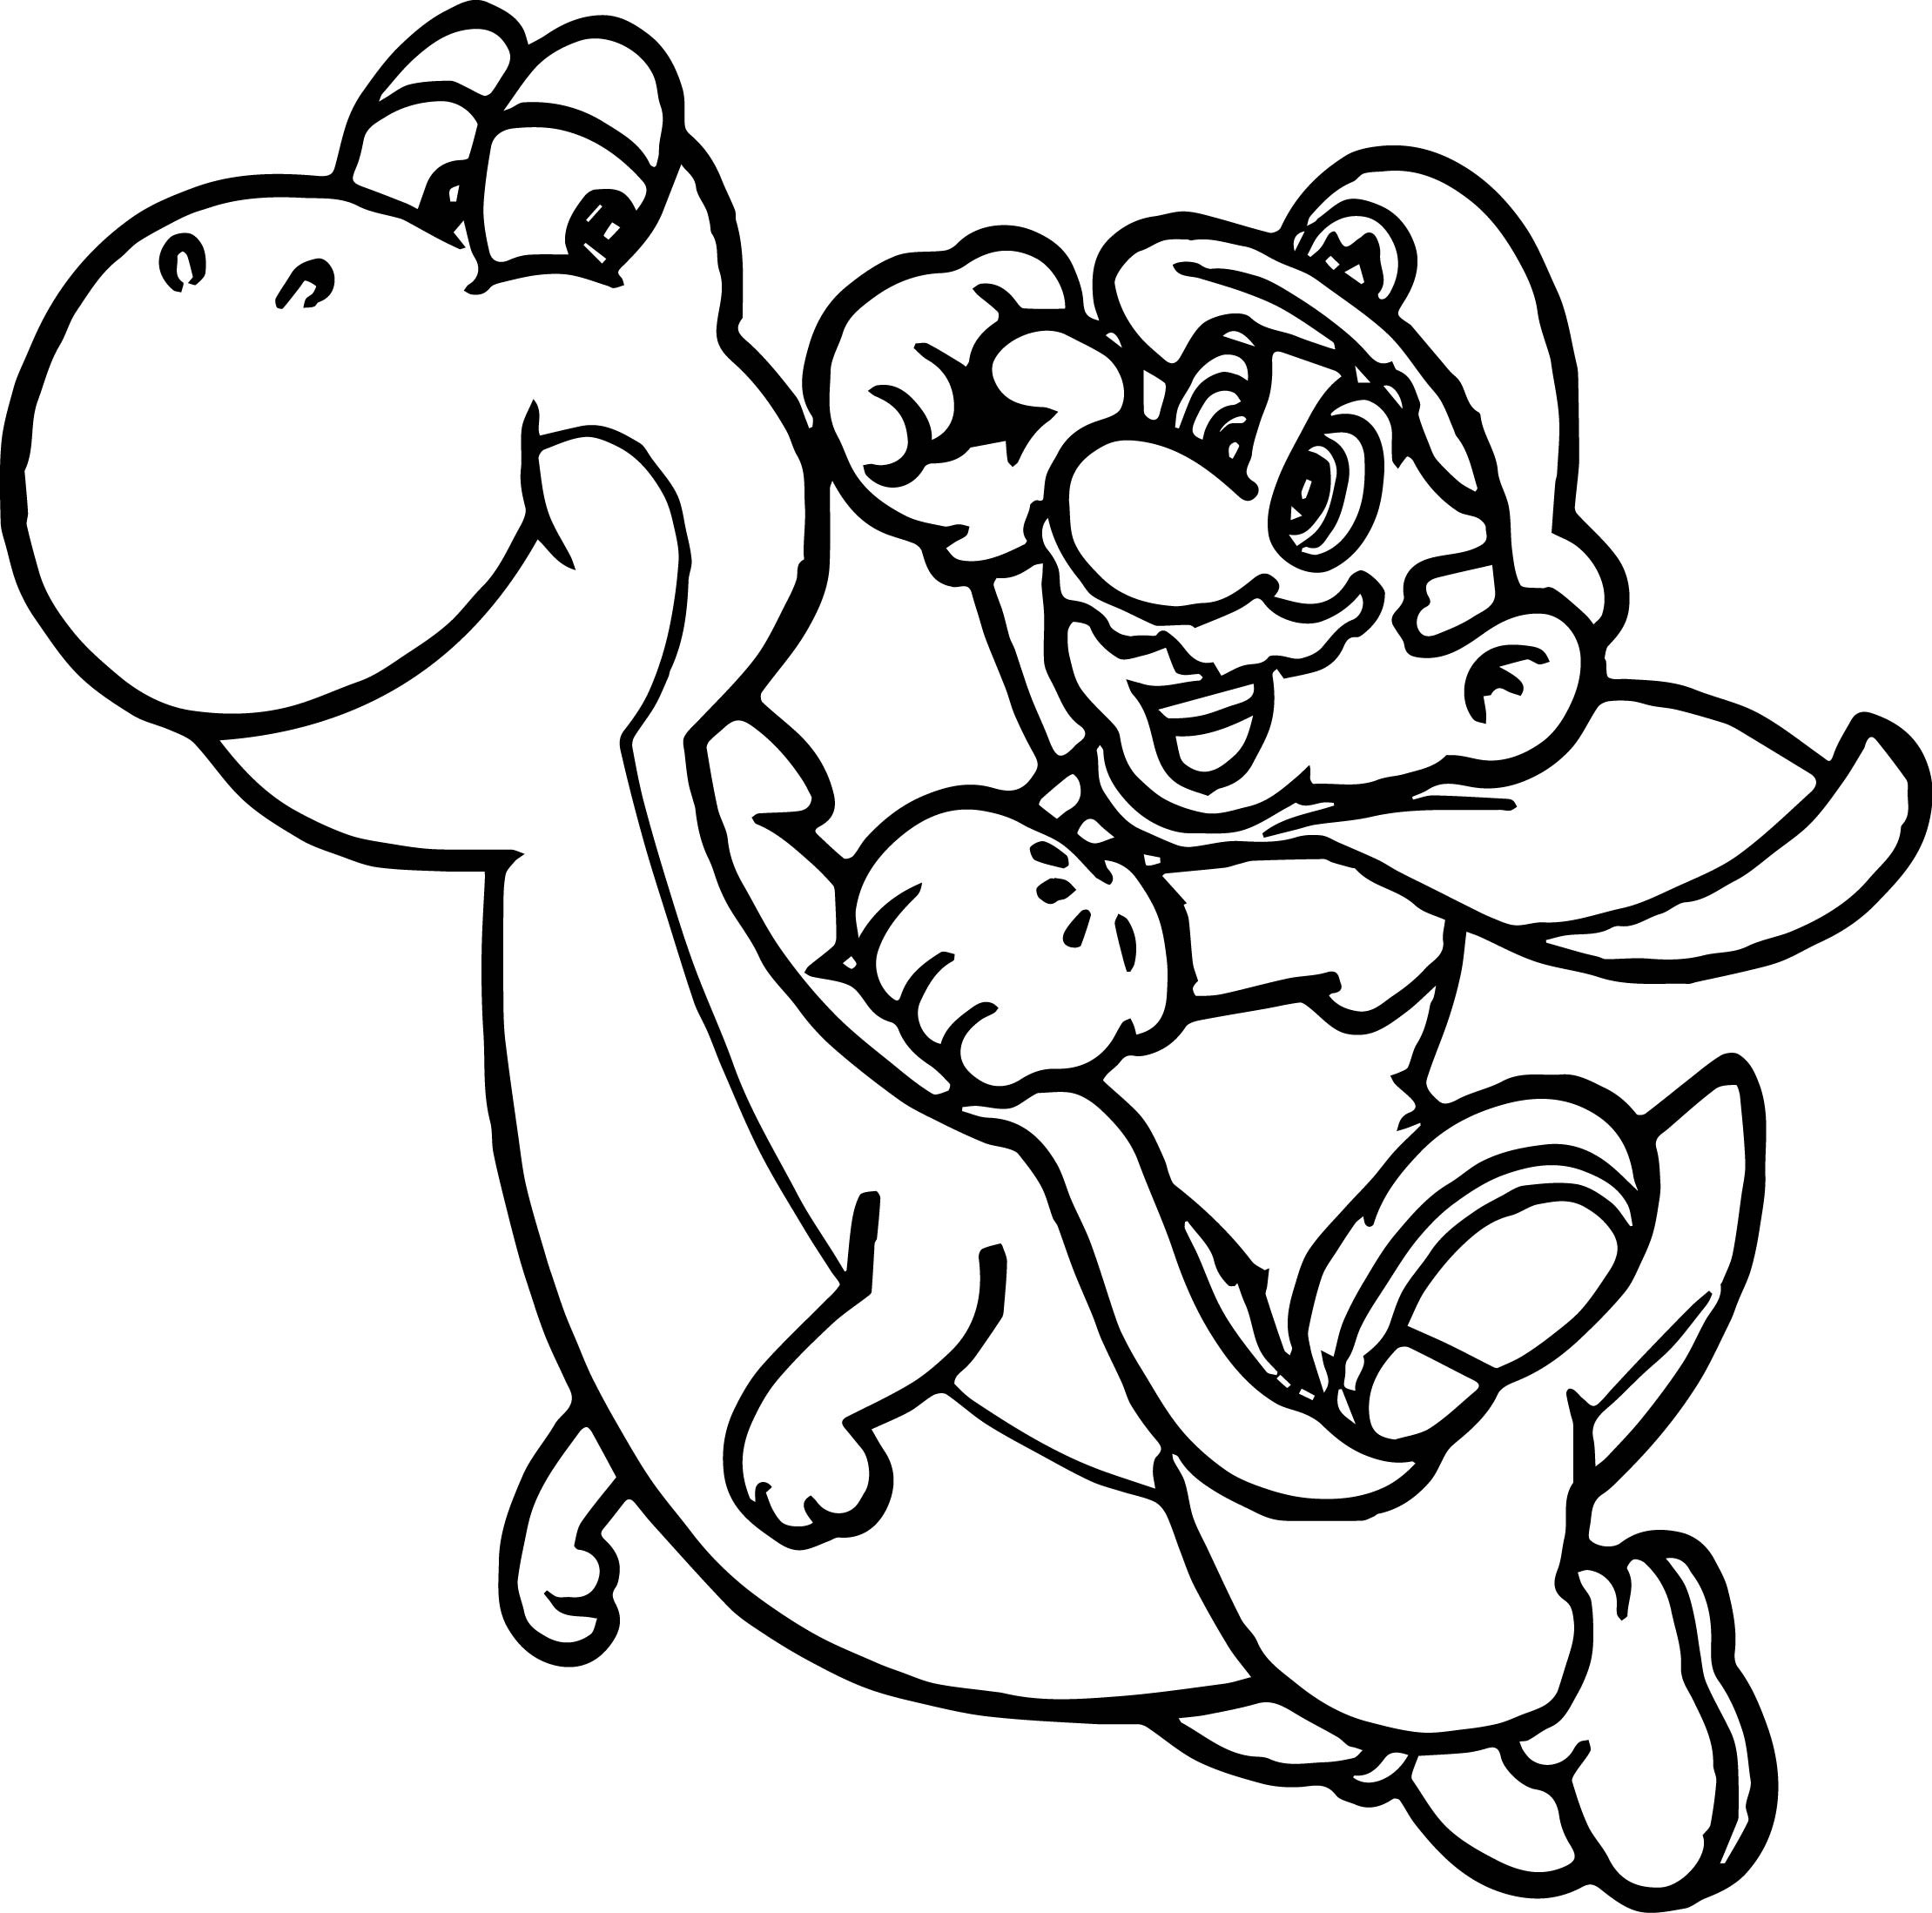 Super Mario Odyssey Coloring Pages
 Super Mario and Yoshi Fly Coloring Page to Print Free